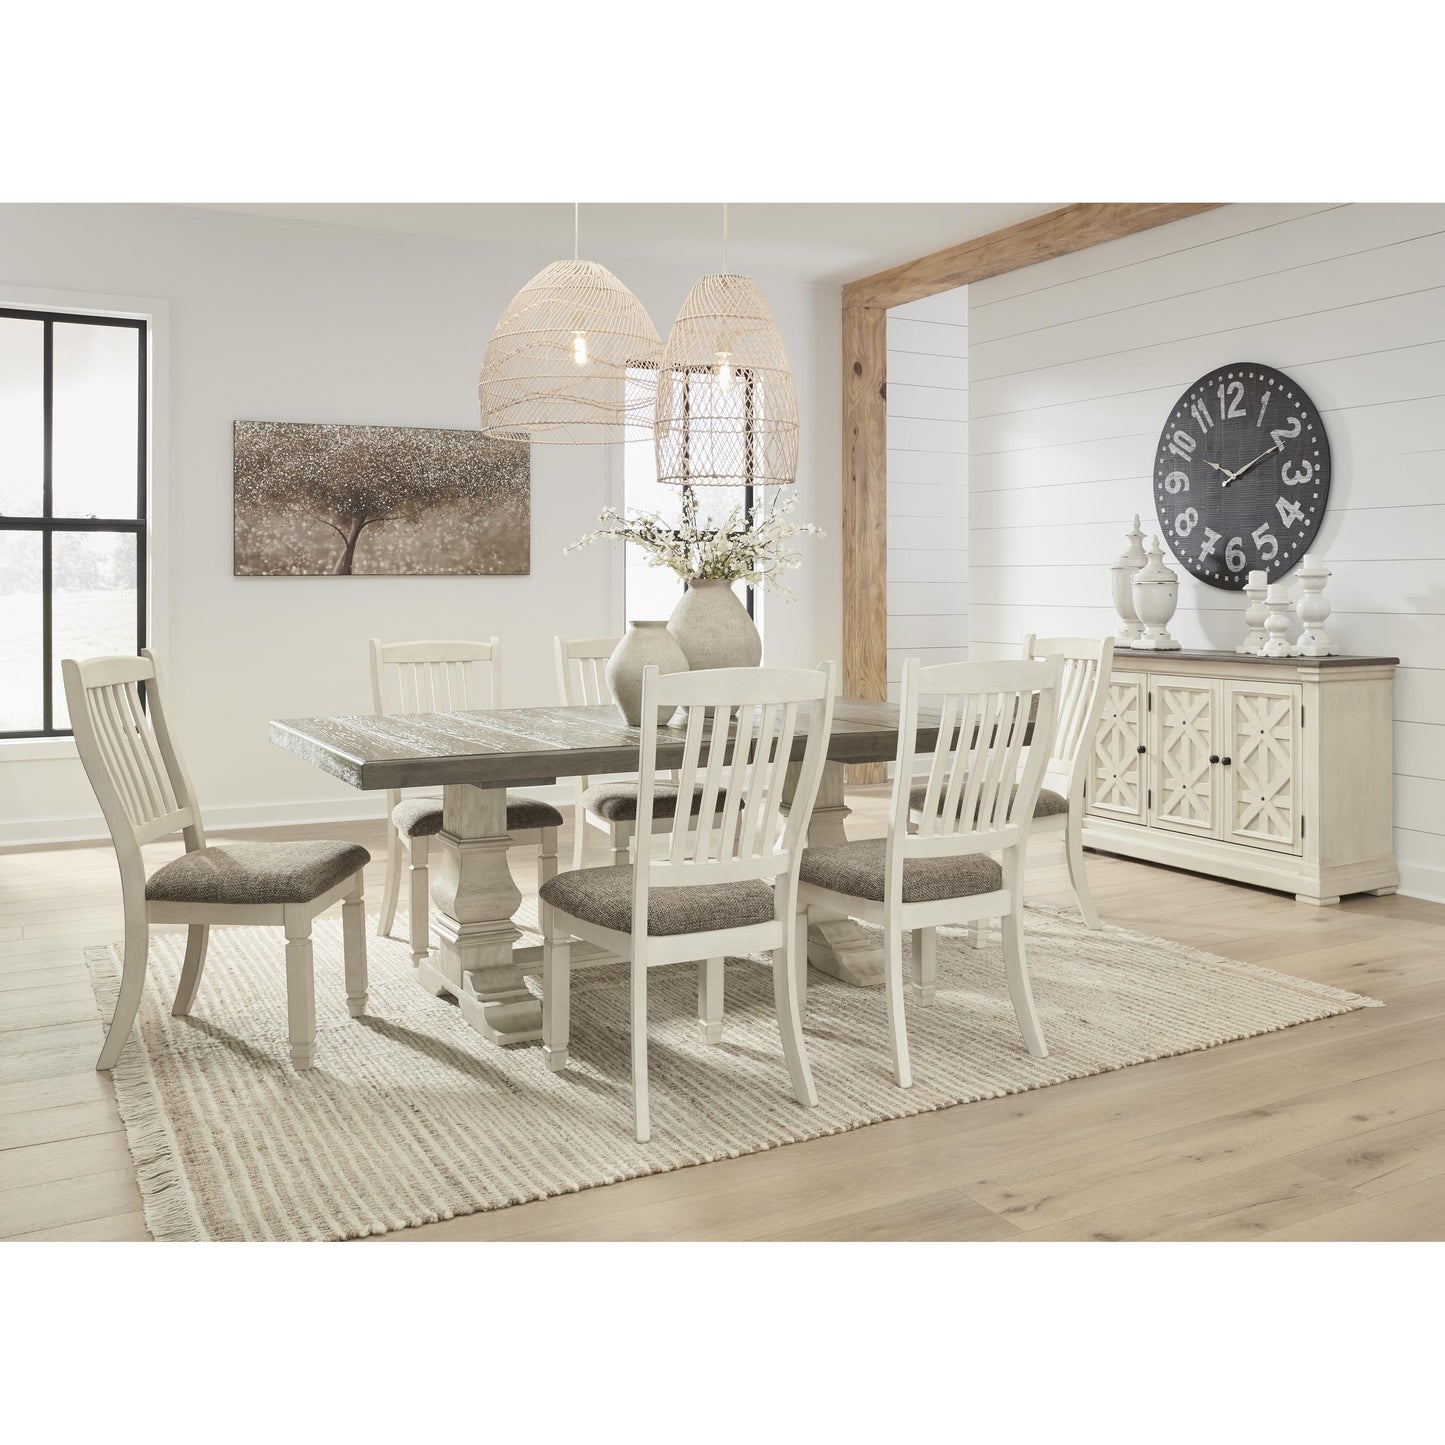 Signature Design by Ashley Bolanburg Dining Table with Trestle Base D647-55T/D647-55B IMAGE 10